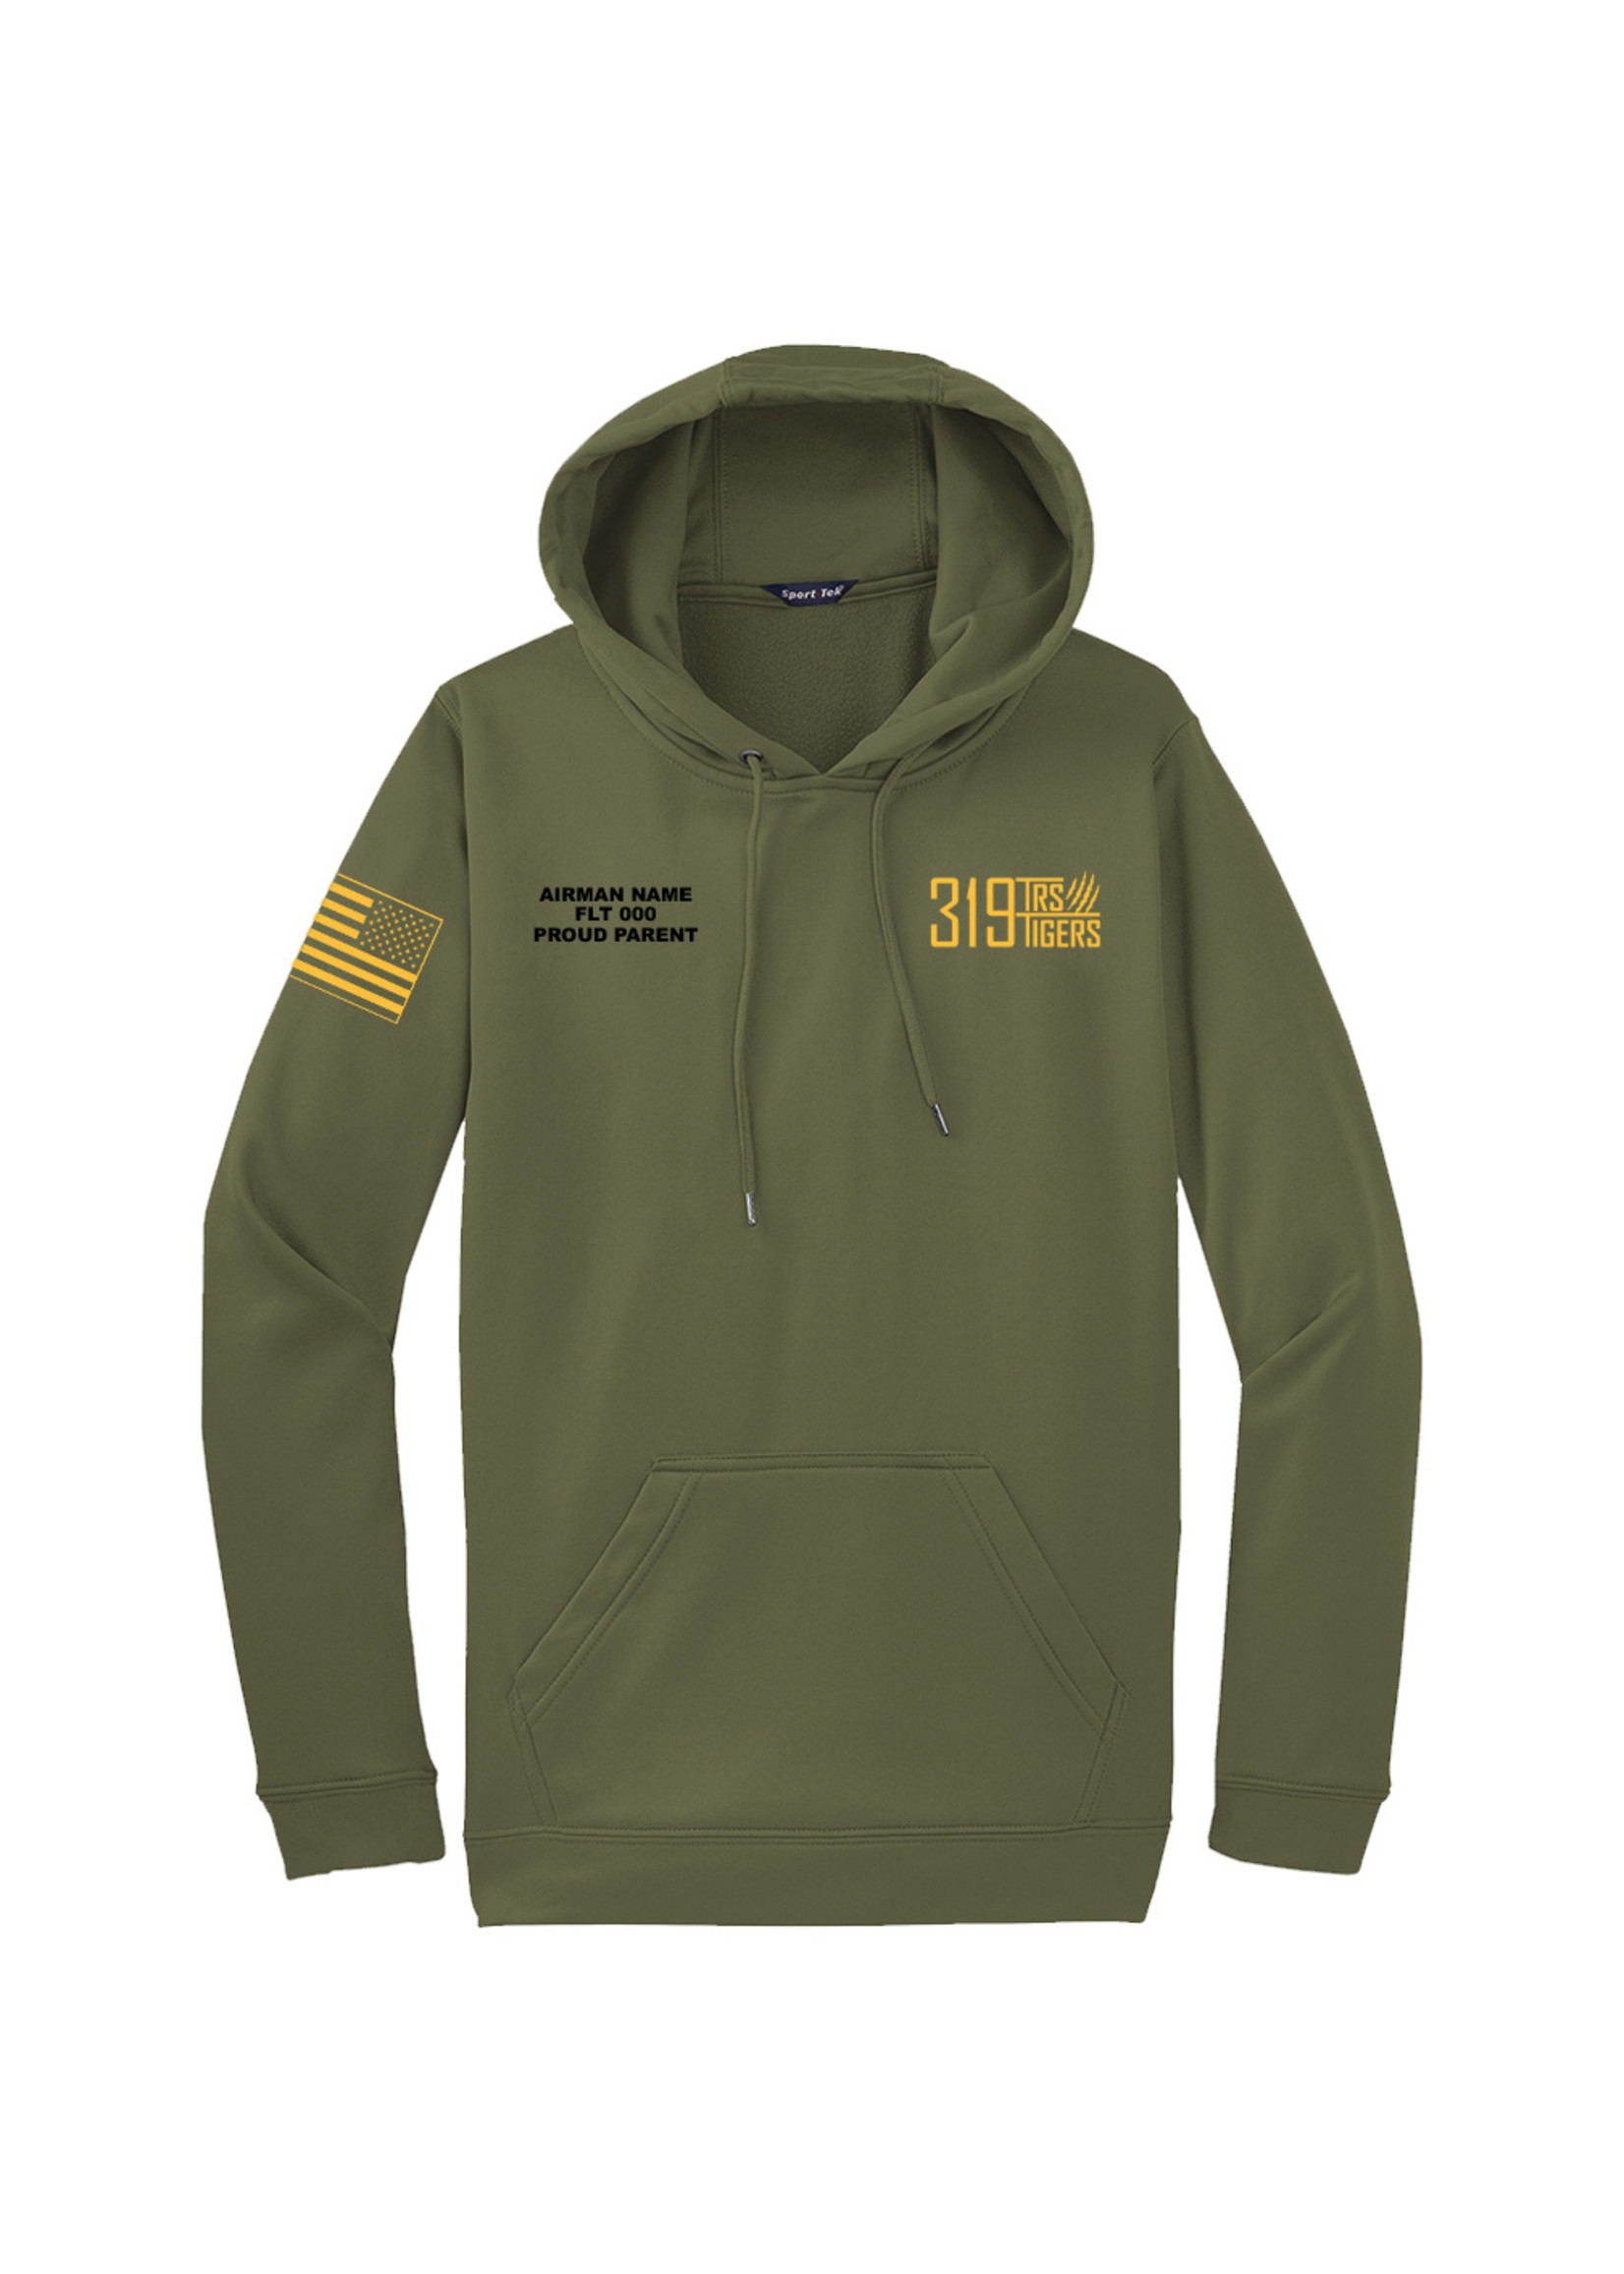 319th Tigers Cotton Hoodie